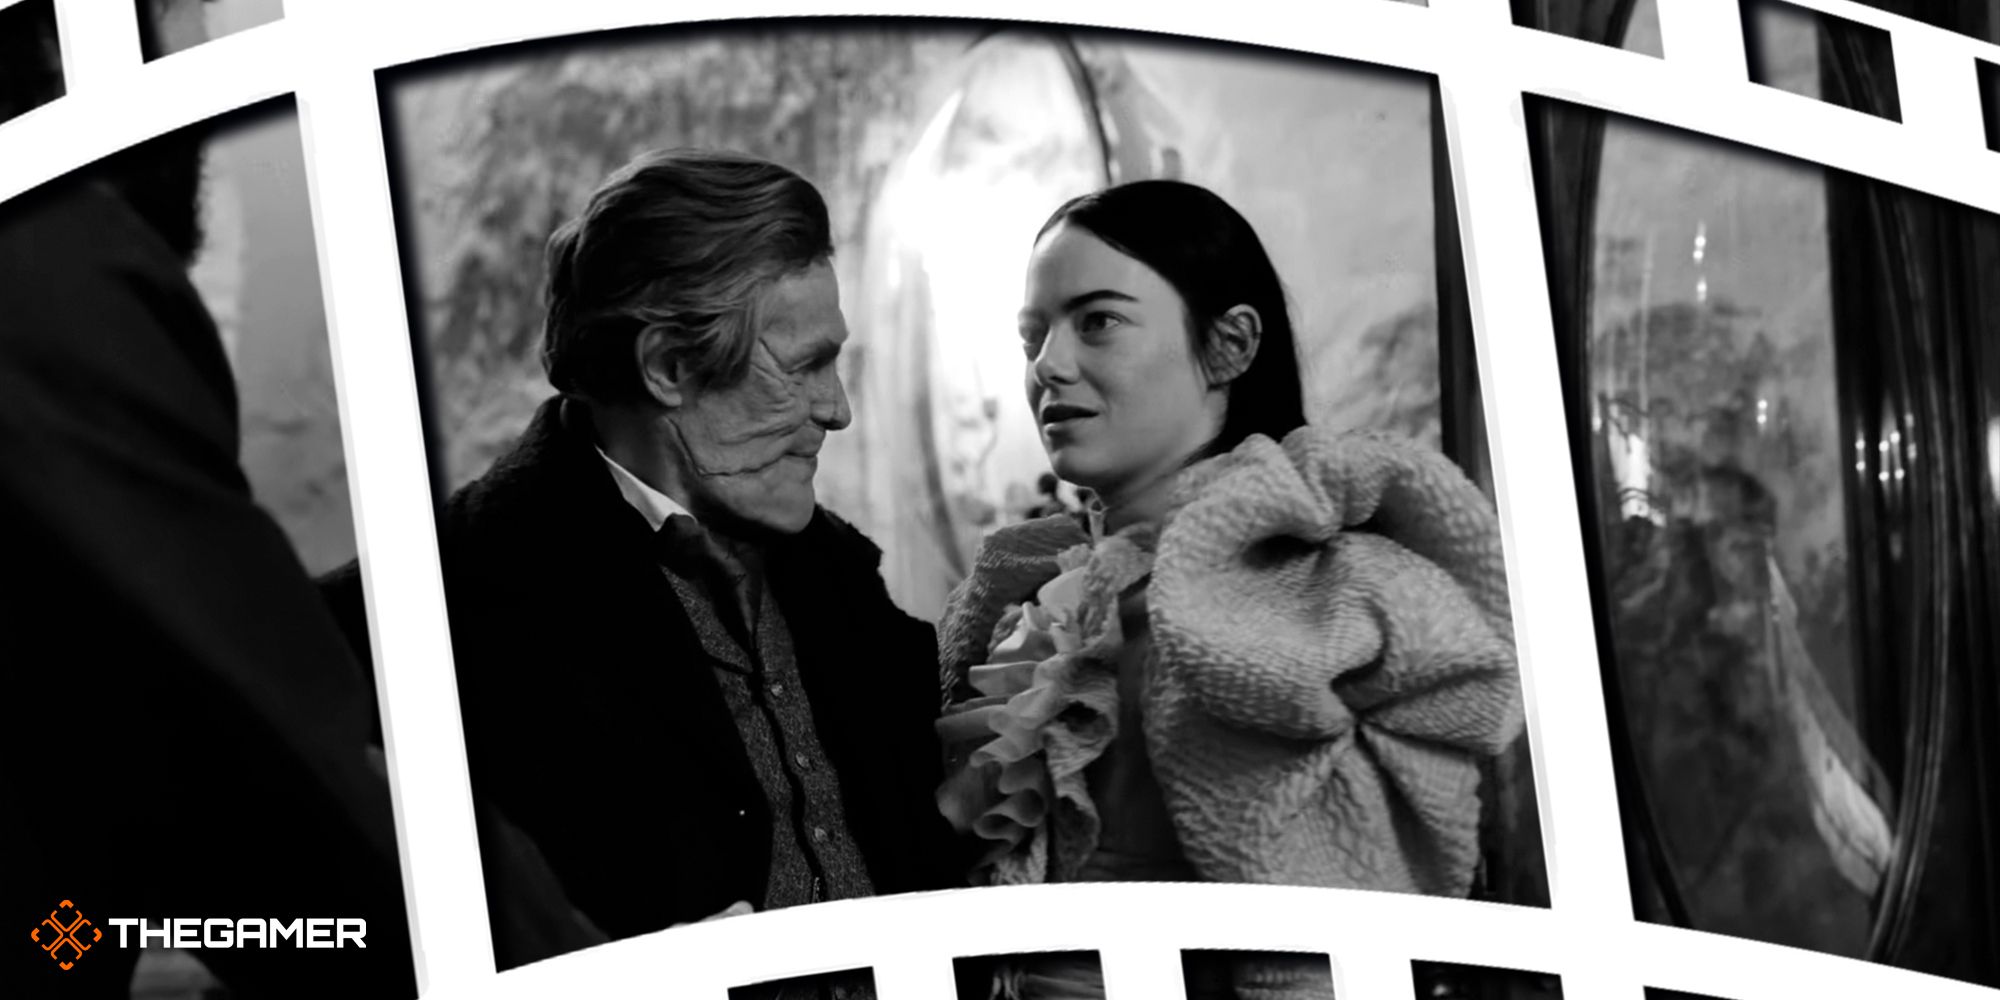 Willem Dafoe and Emma Stone in Poor Things on a film stock graphic